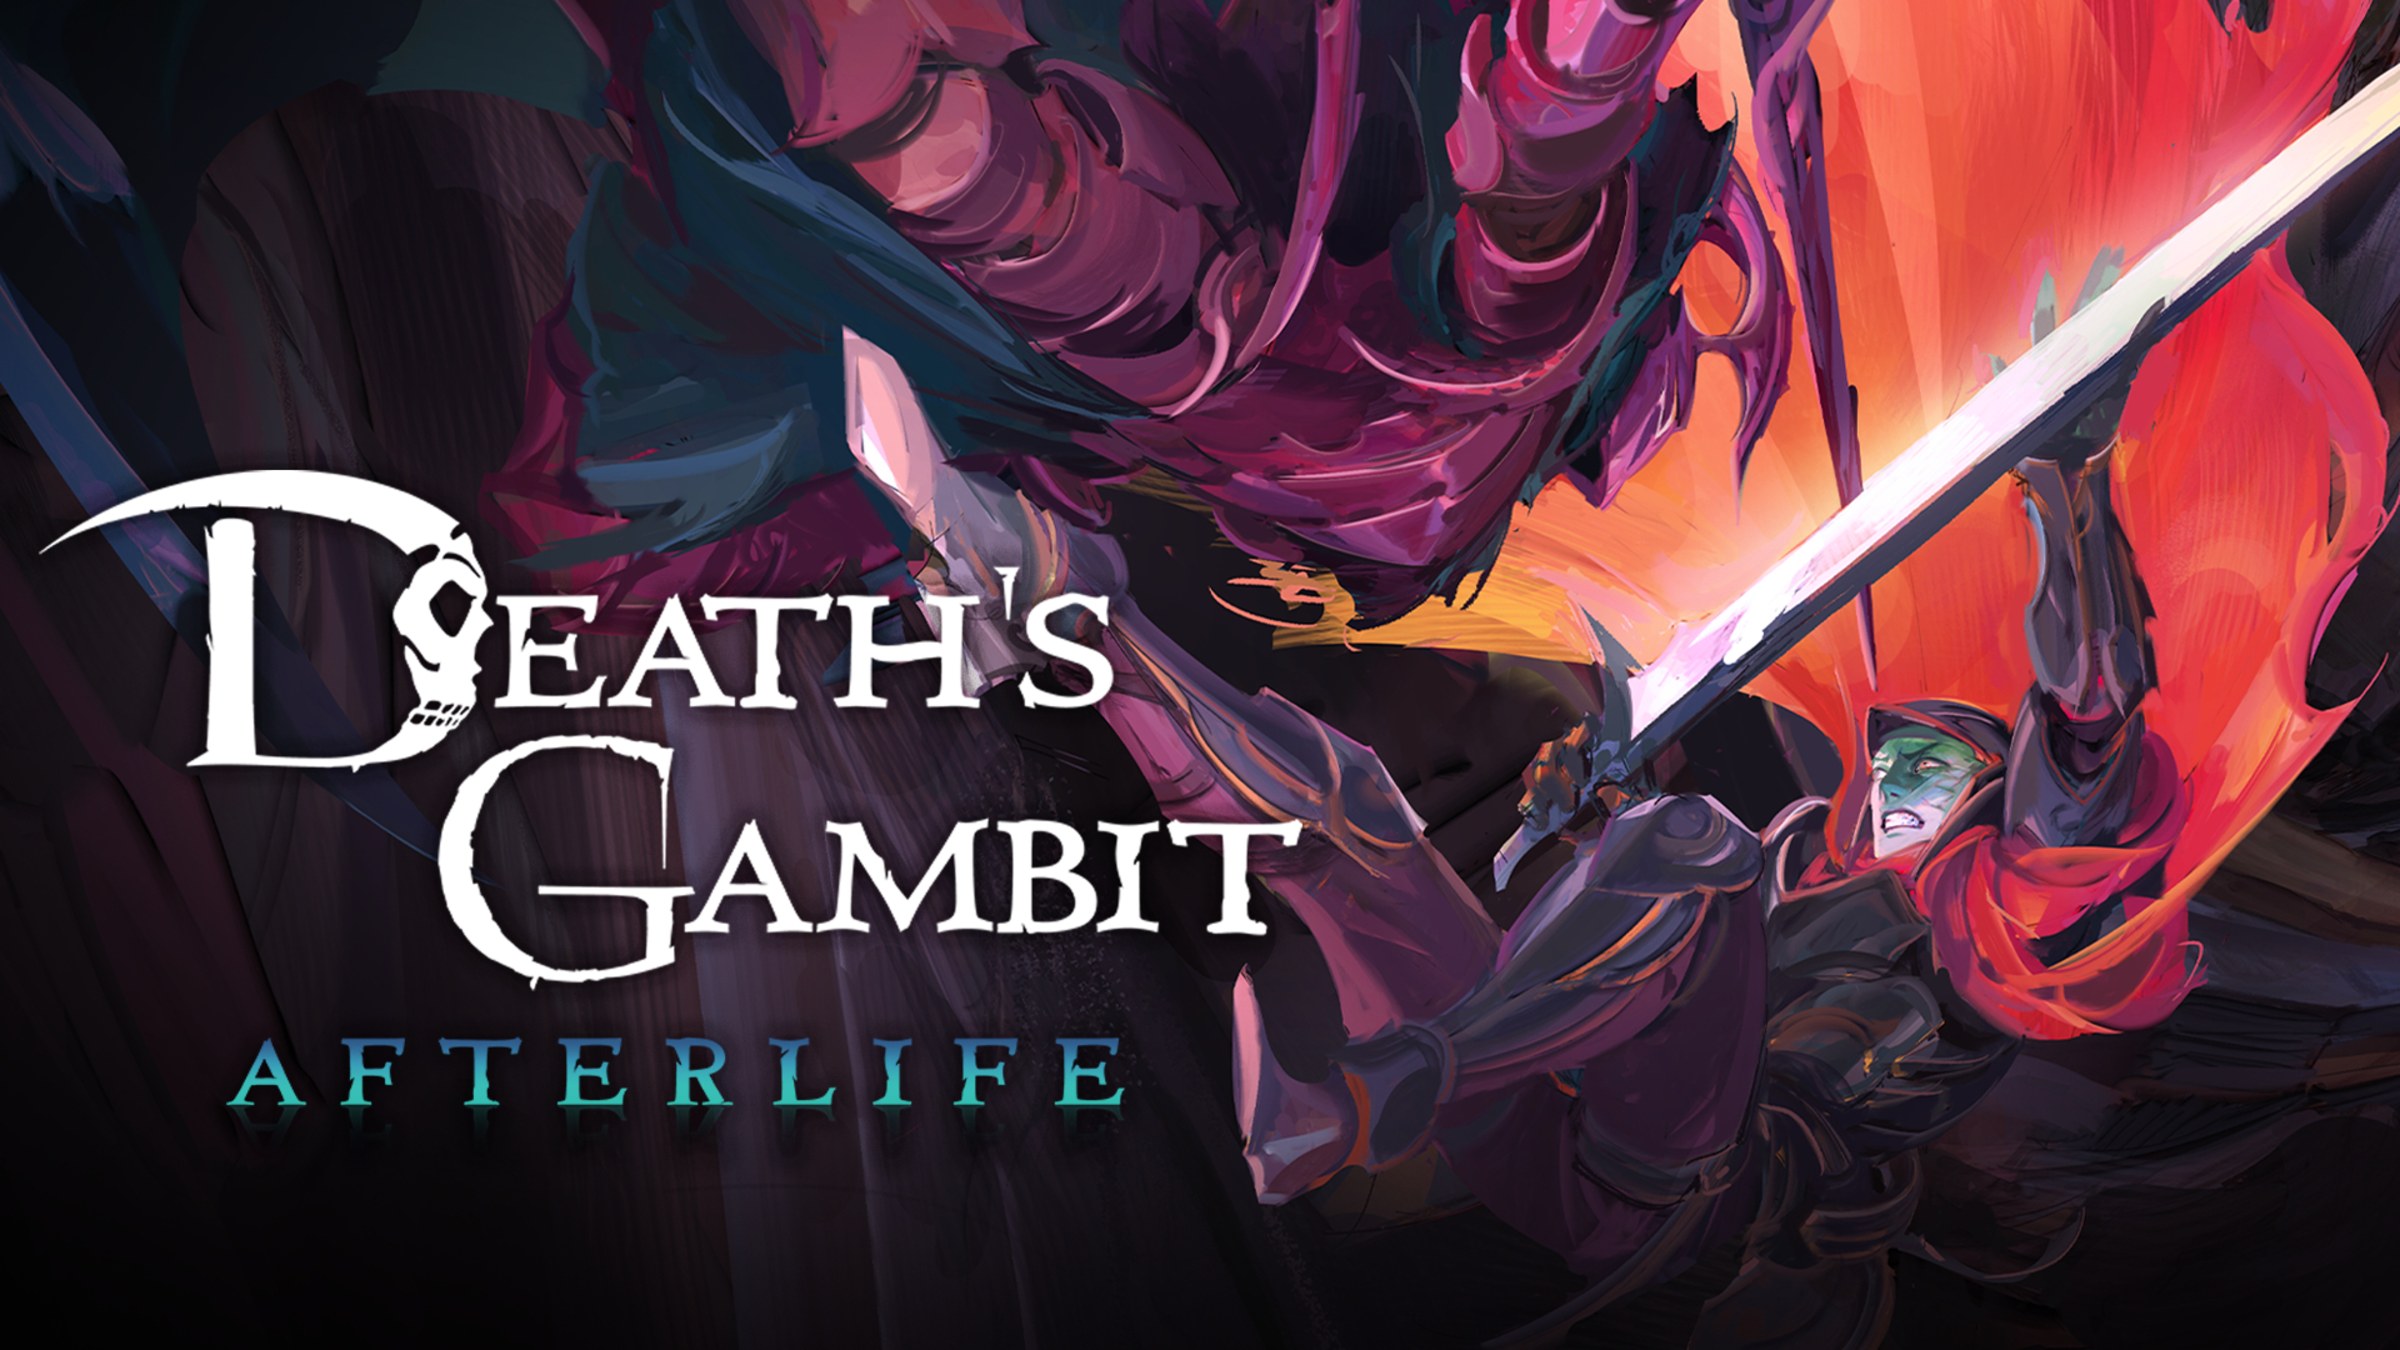 Buy Death's Gambit Afterlife Ashes of Vados CD Key Compare Prices